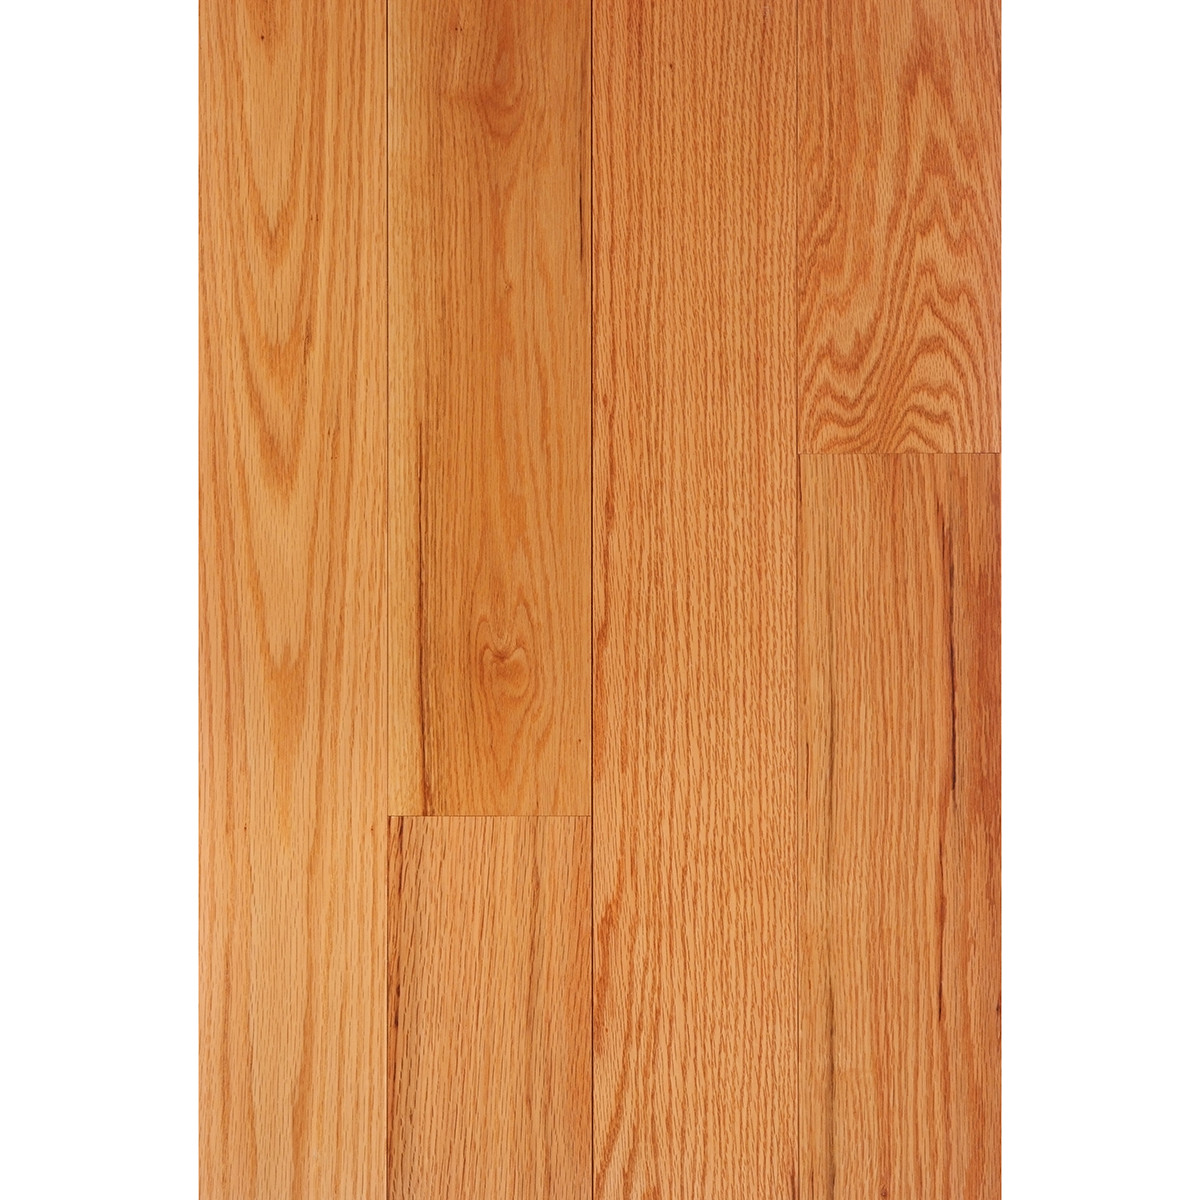 26 Unique 2 Red Oak Hardwood Flooring 2024 free download 2 red oak hardwood flooring of red oak 3 4 x 5 select grade flooring regarding other items in this category